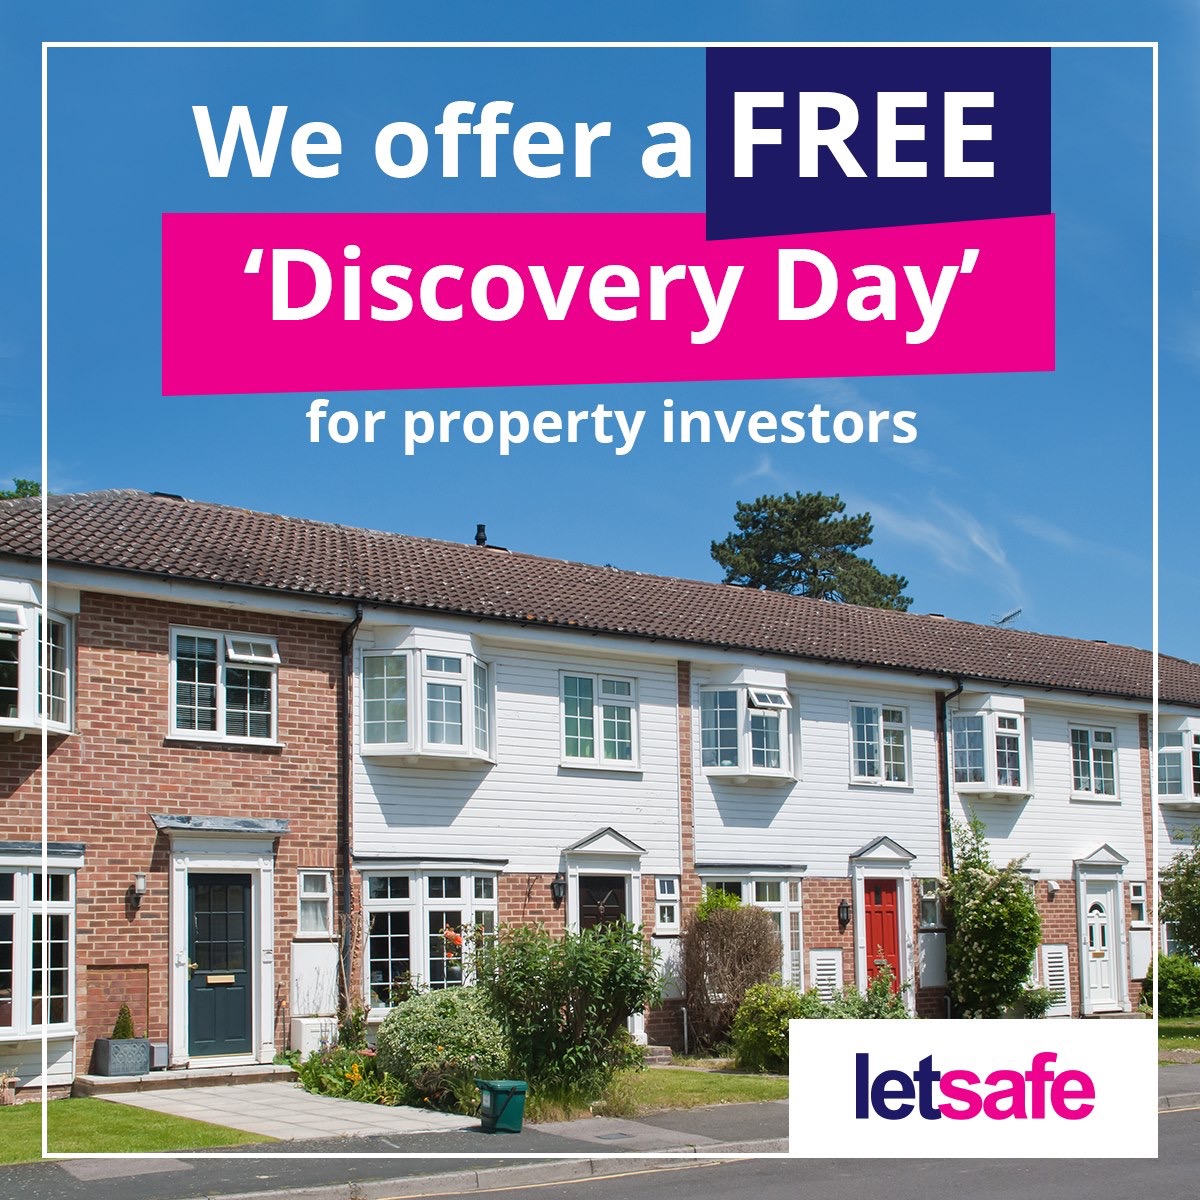 Book a Discovery Day